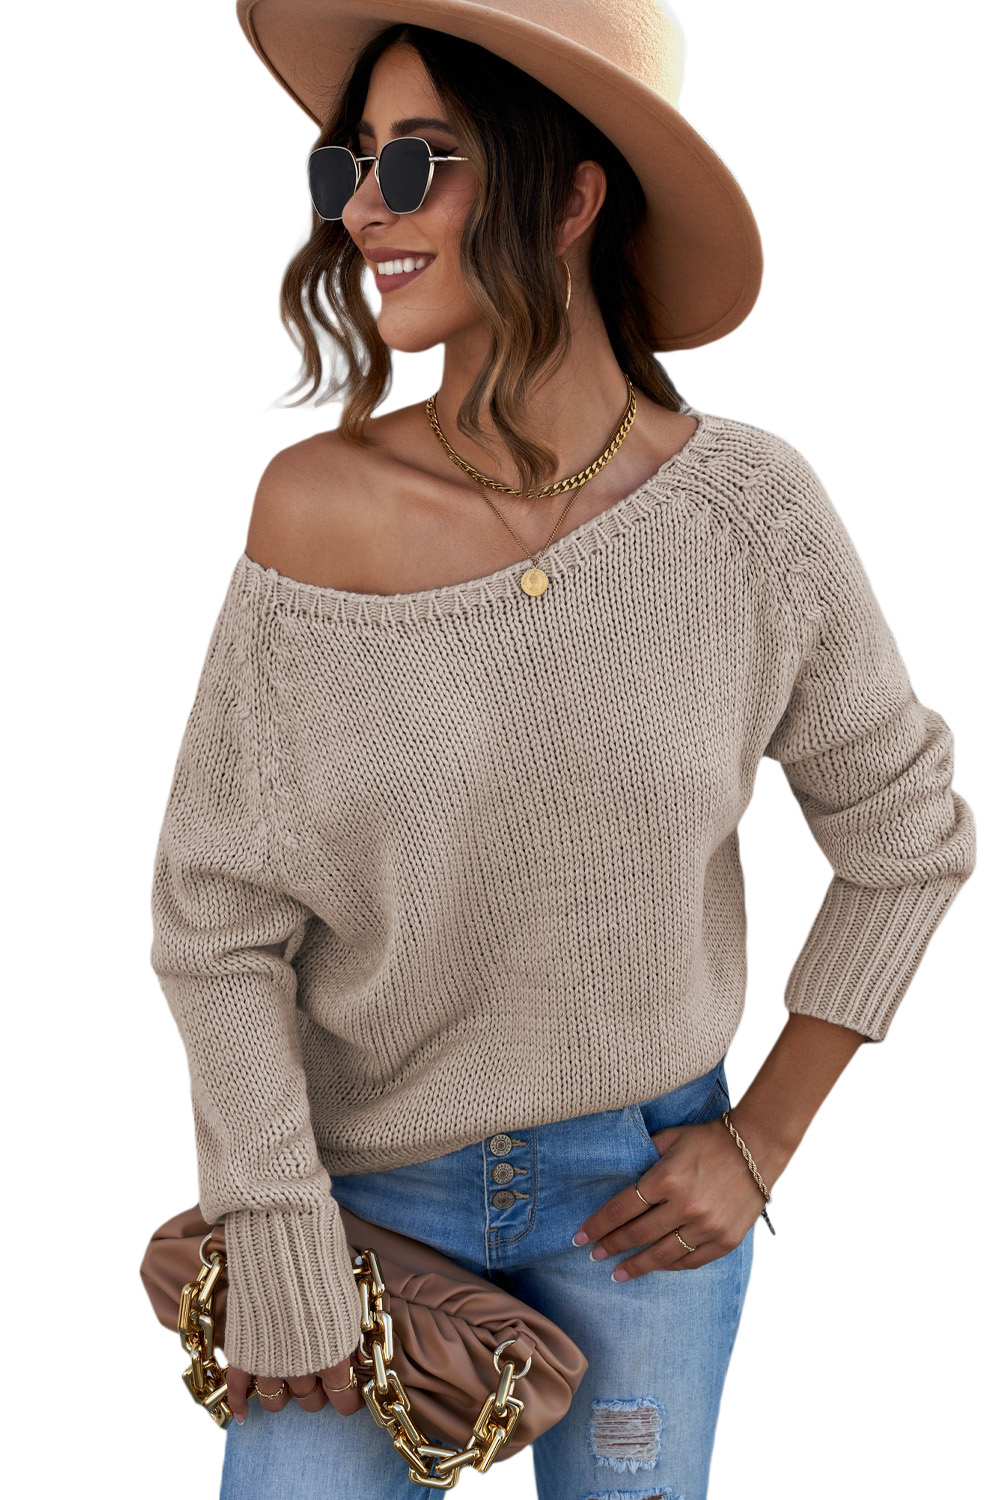 Khaki Loose Long Sleeve Knitted Sweater - Passion of Essence Boutique